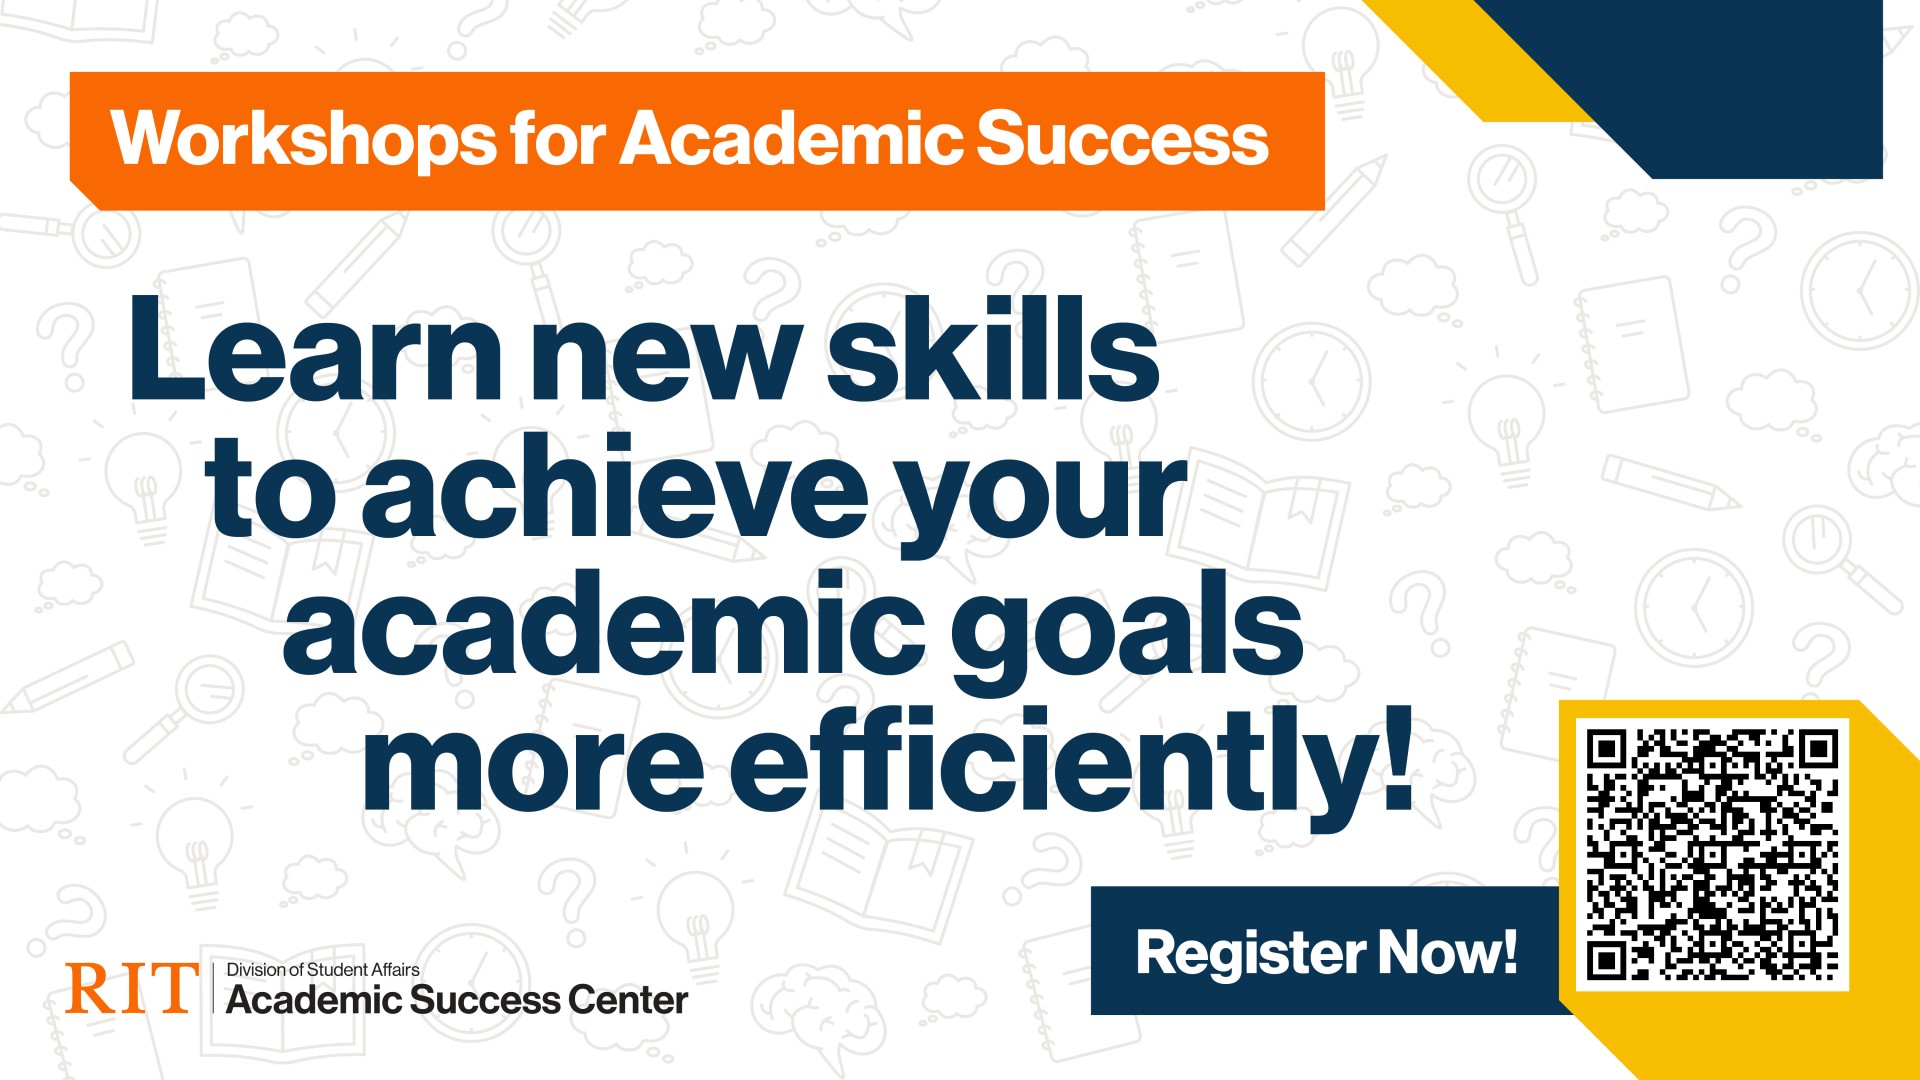 Workshops for Academic Success. Learn new skills to achieve your academic goals more efficiently!